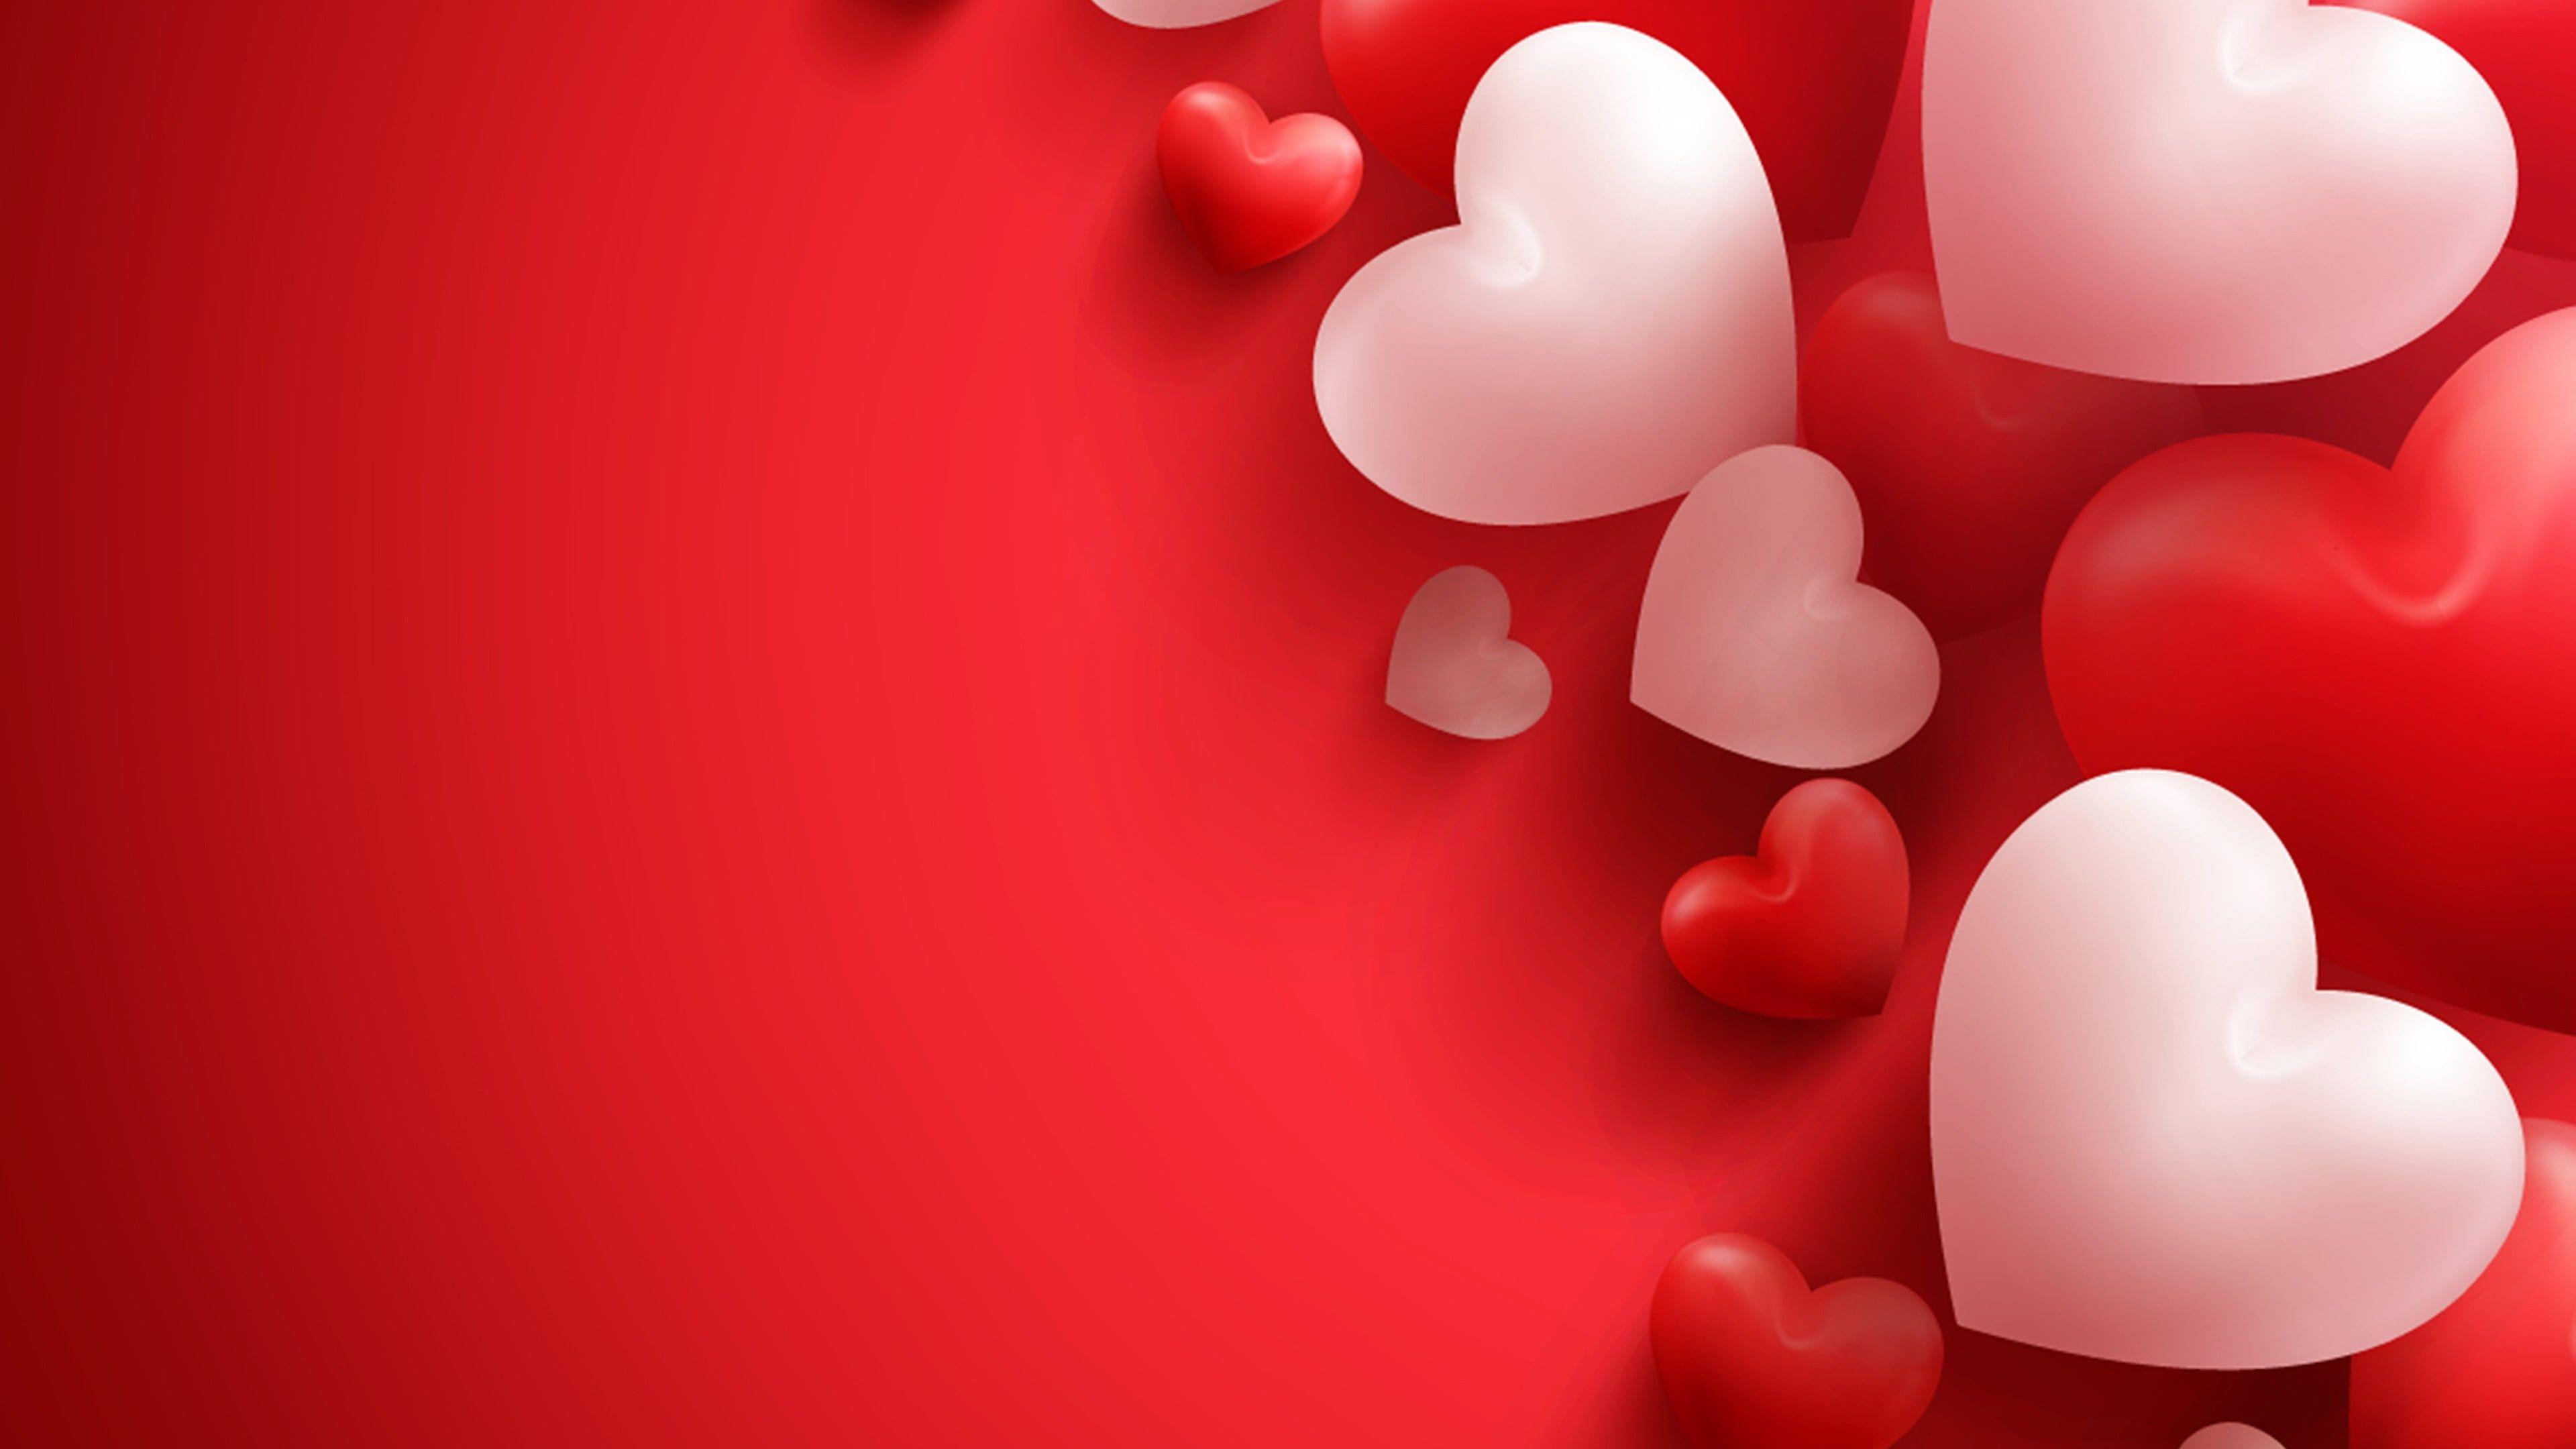 Red heart Wallpaper 4K Water Red background Love 2424